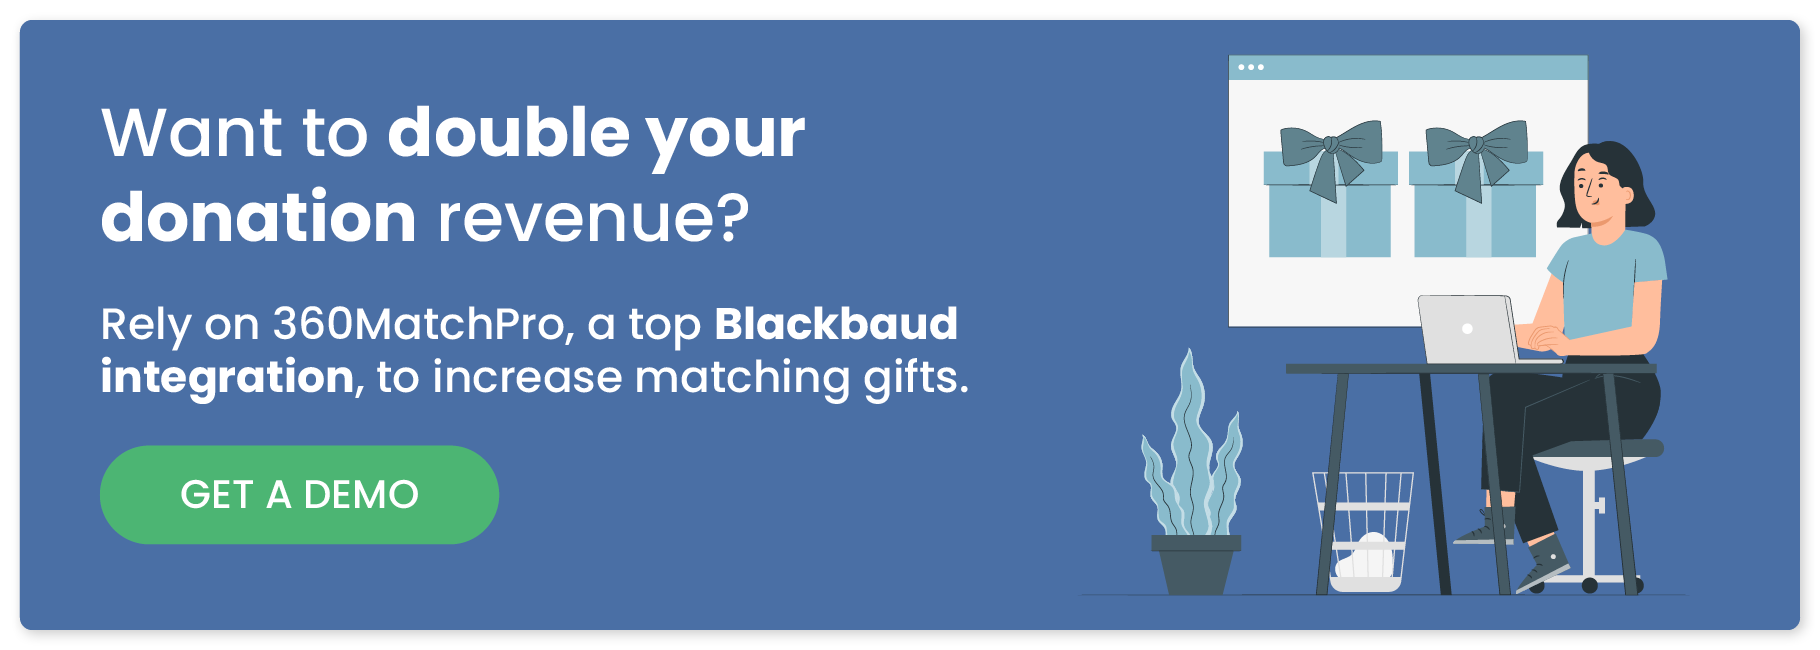 Get a demo of 360MatchPro, a top Blackbaud integration, to increase matching gifts.